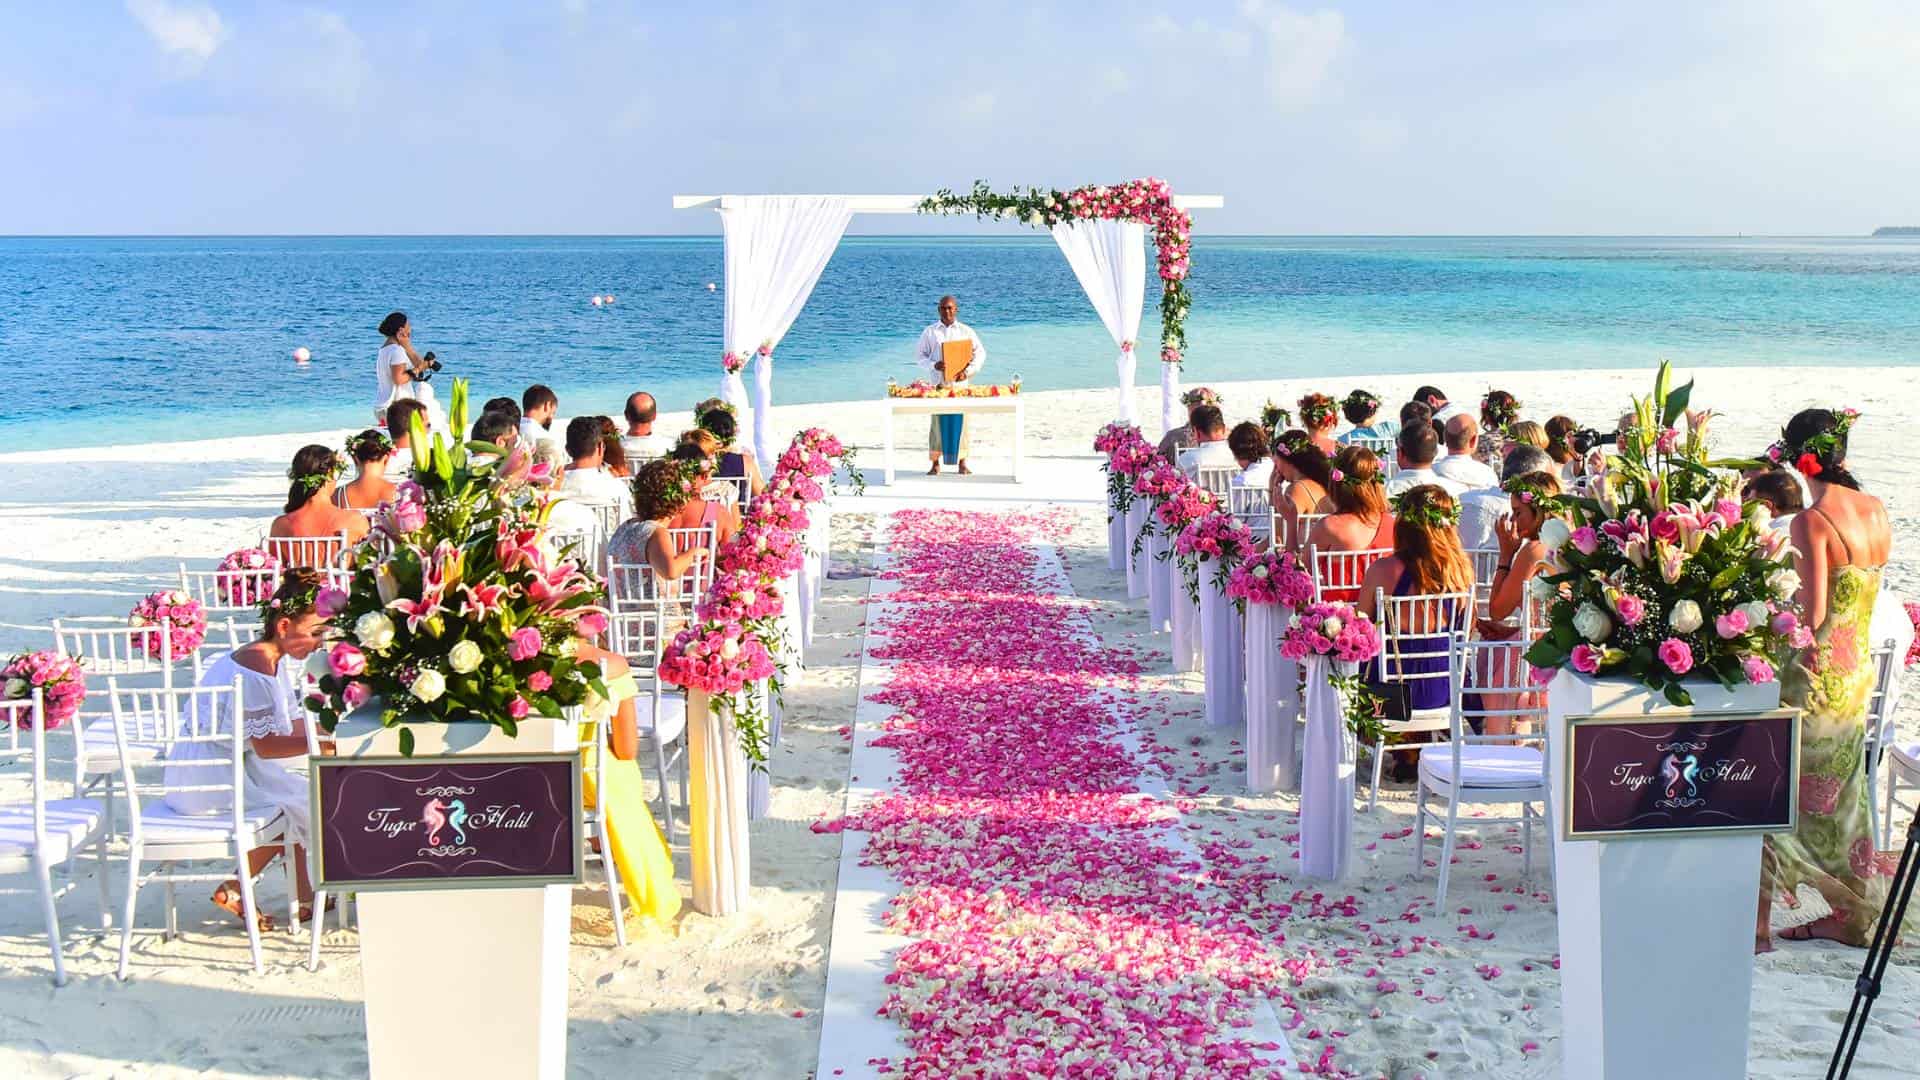 understanding the setting of your outdoor wedding aisle